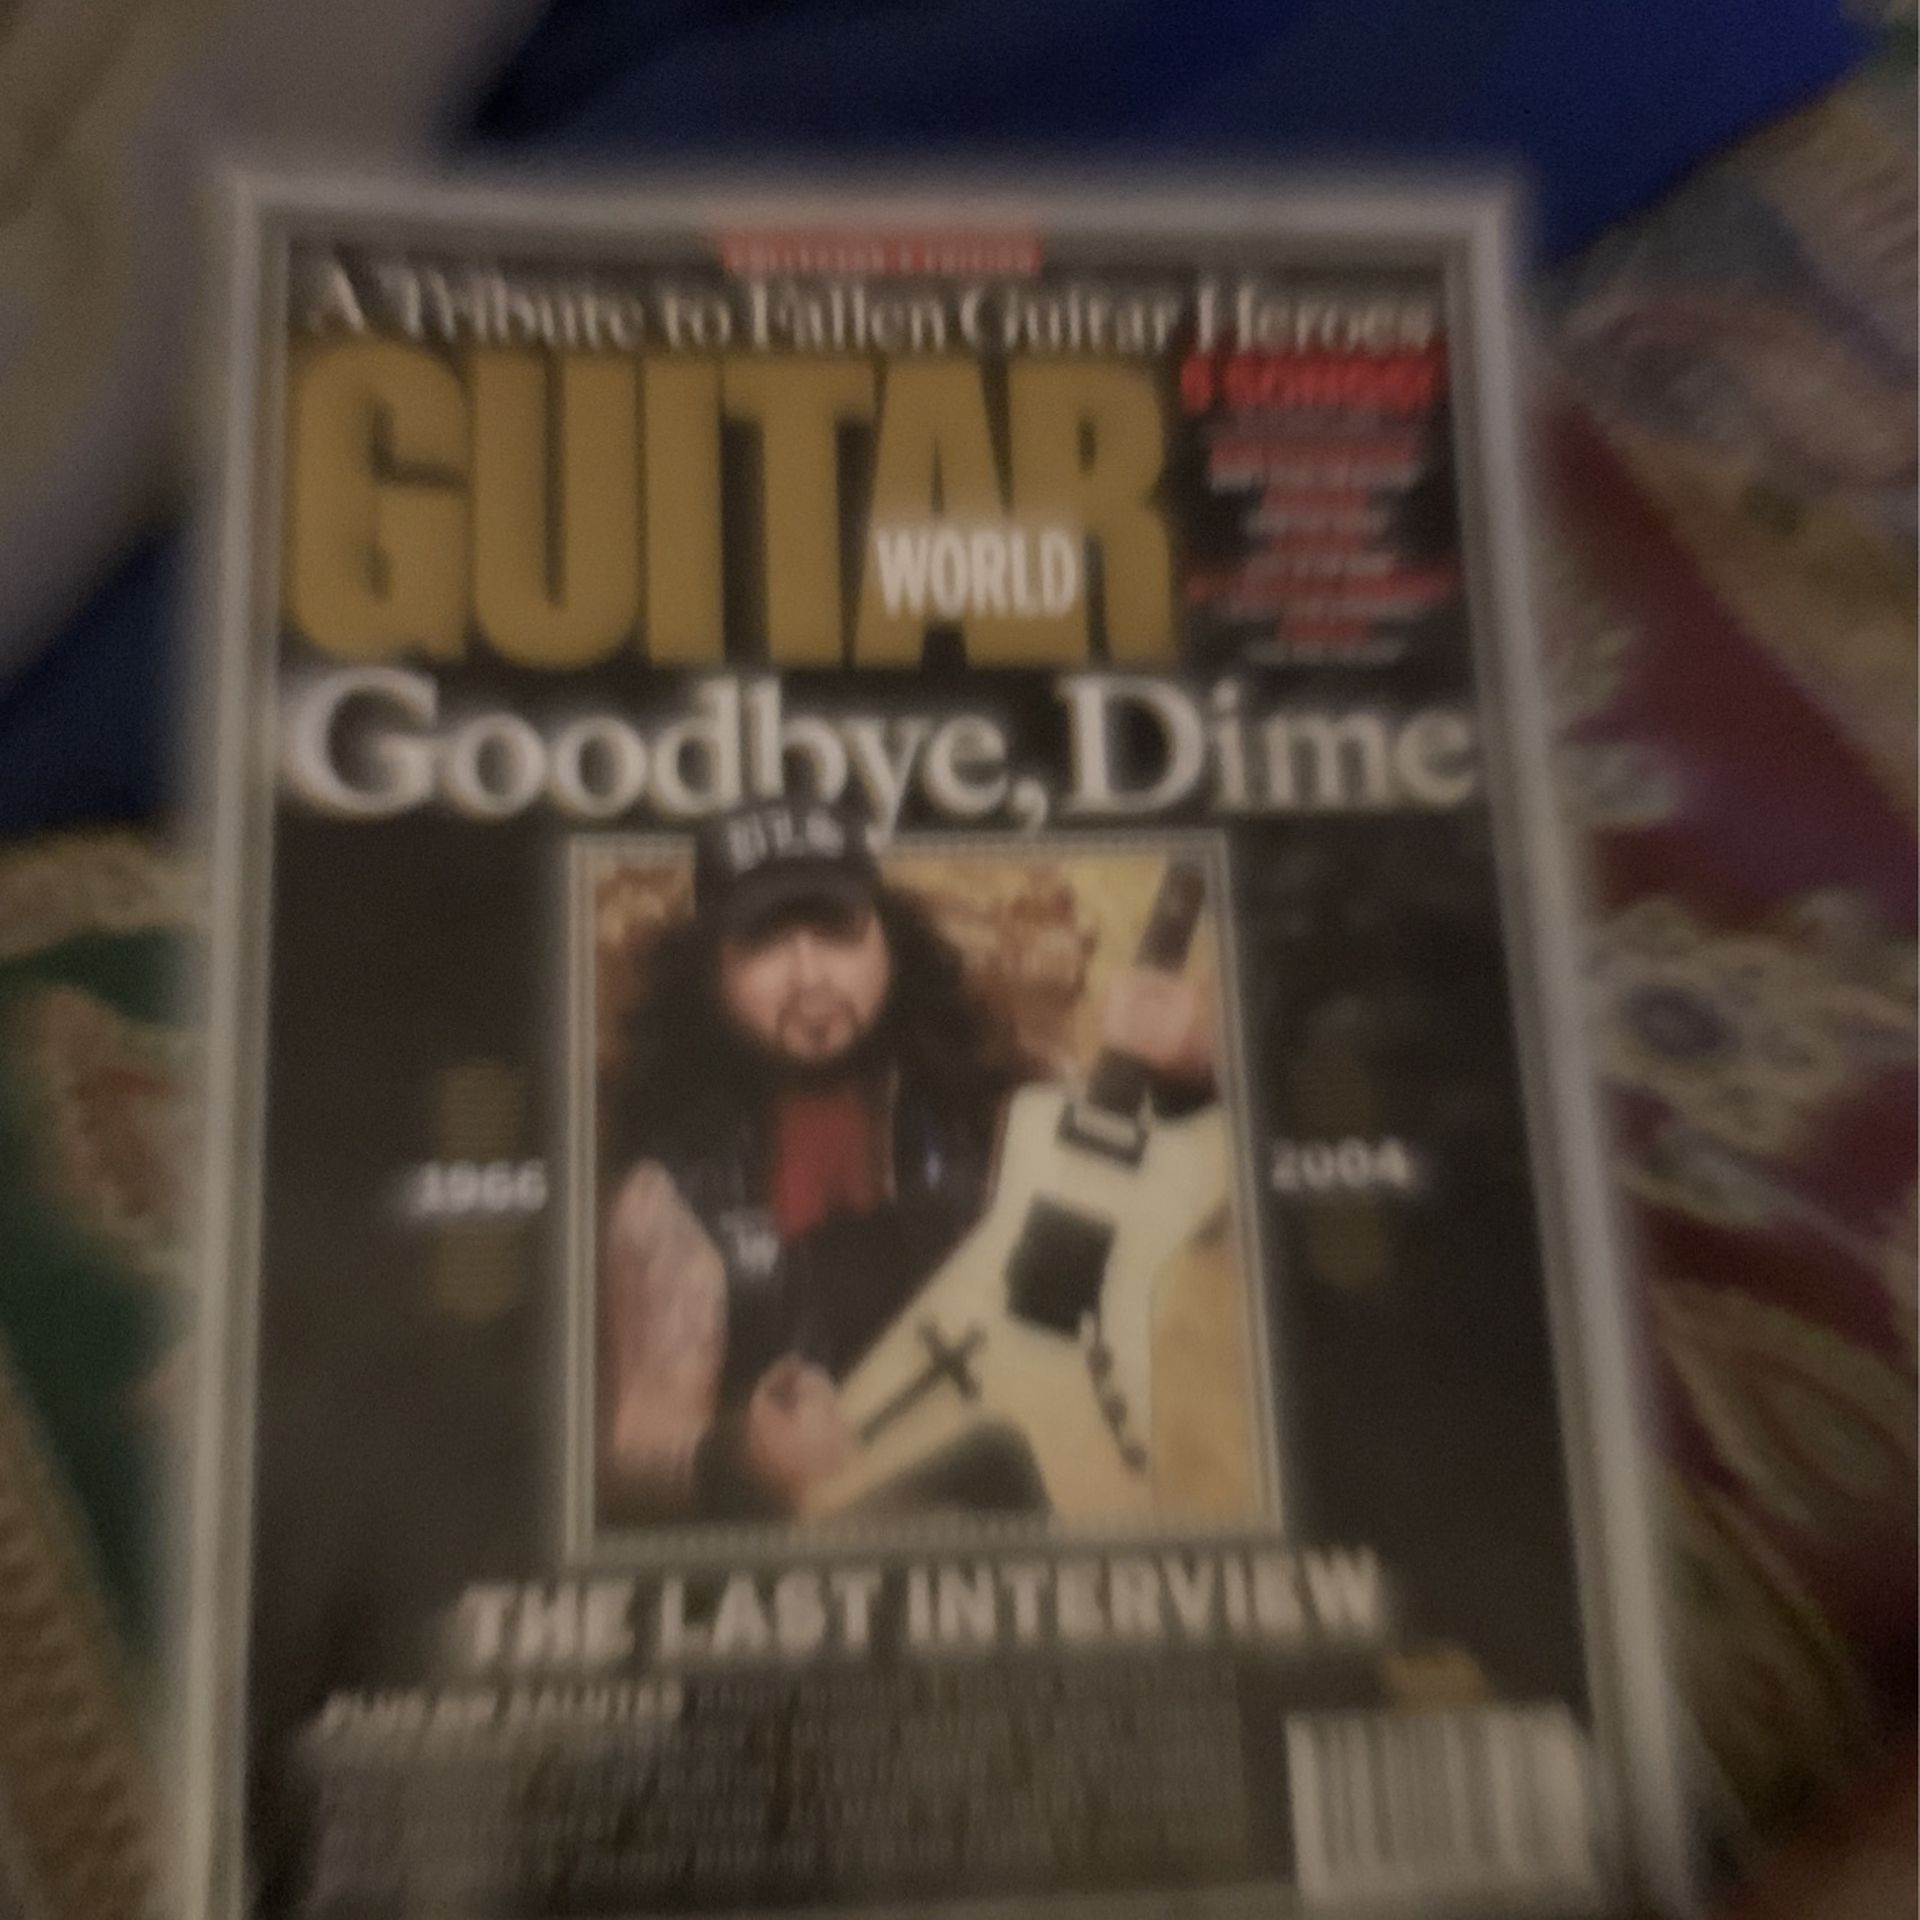 Tribute To Fallen Guitar Heroes (guitar World Special Collectors Edition